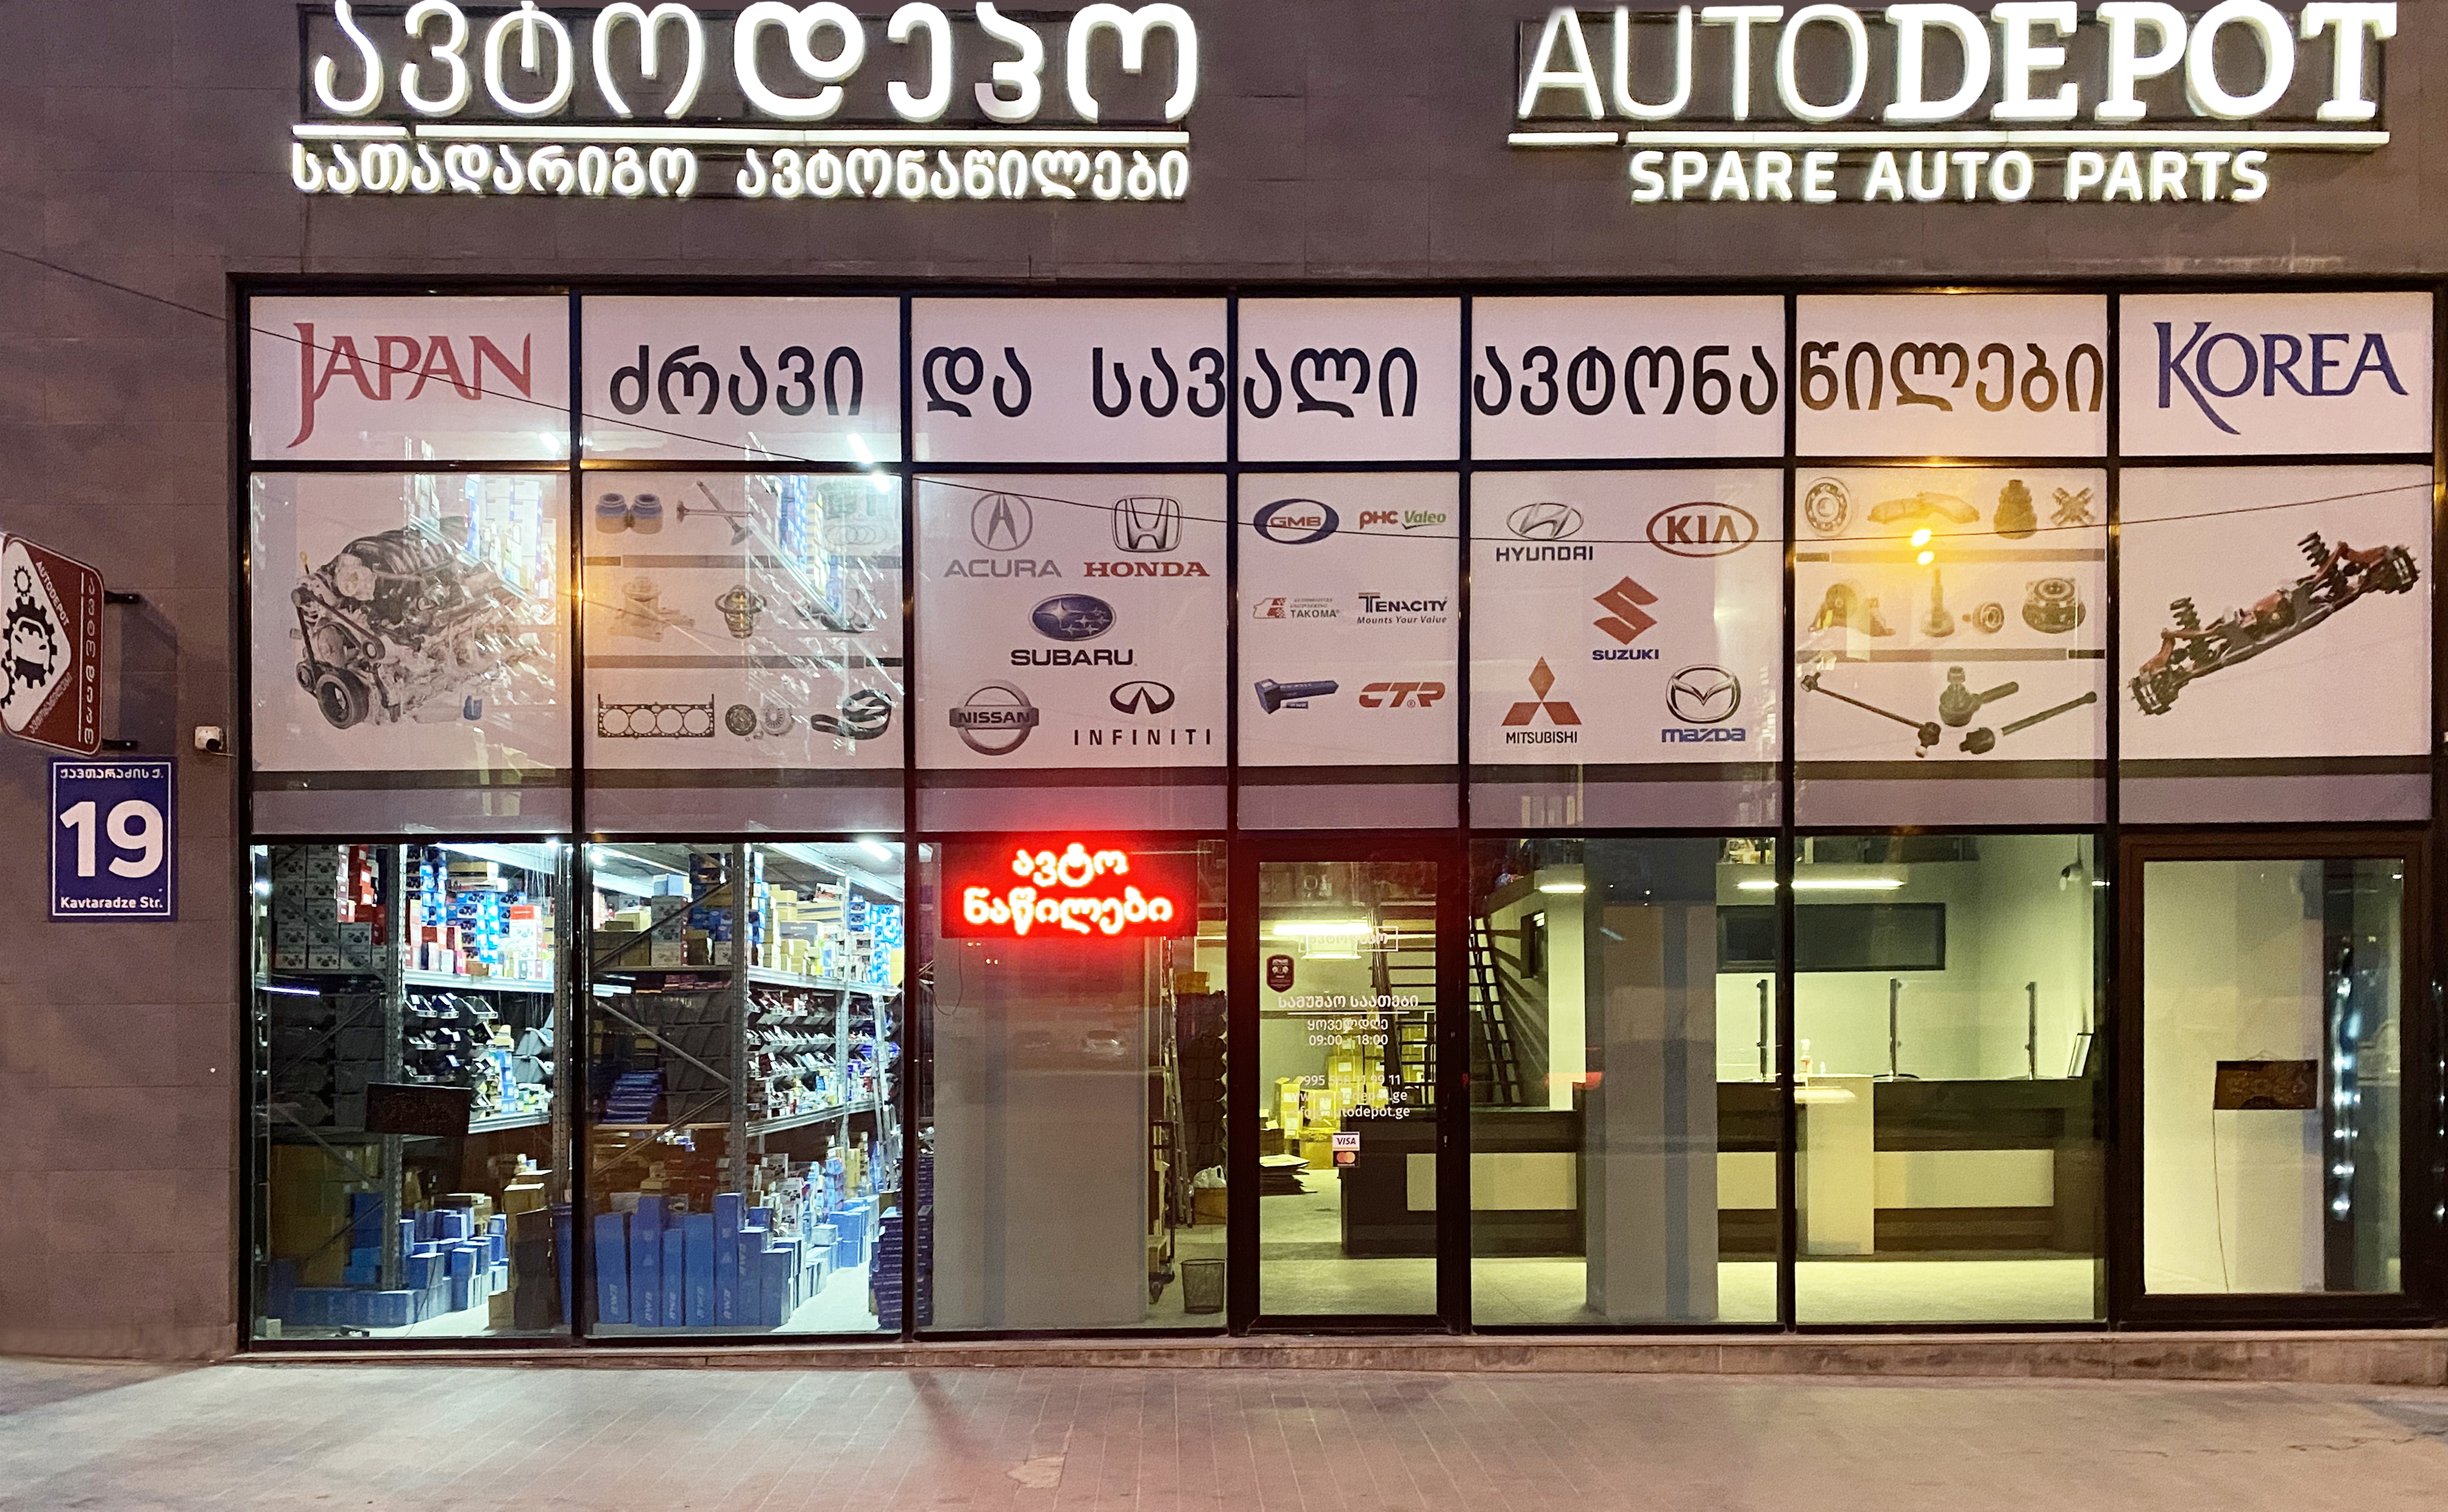 Autodepot store front